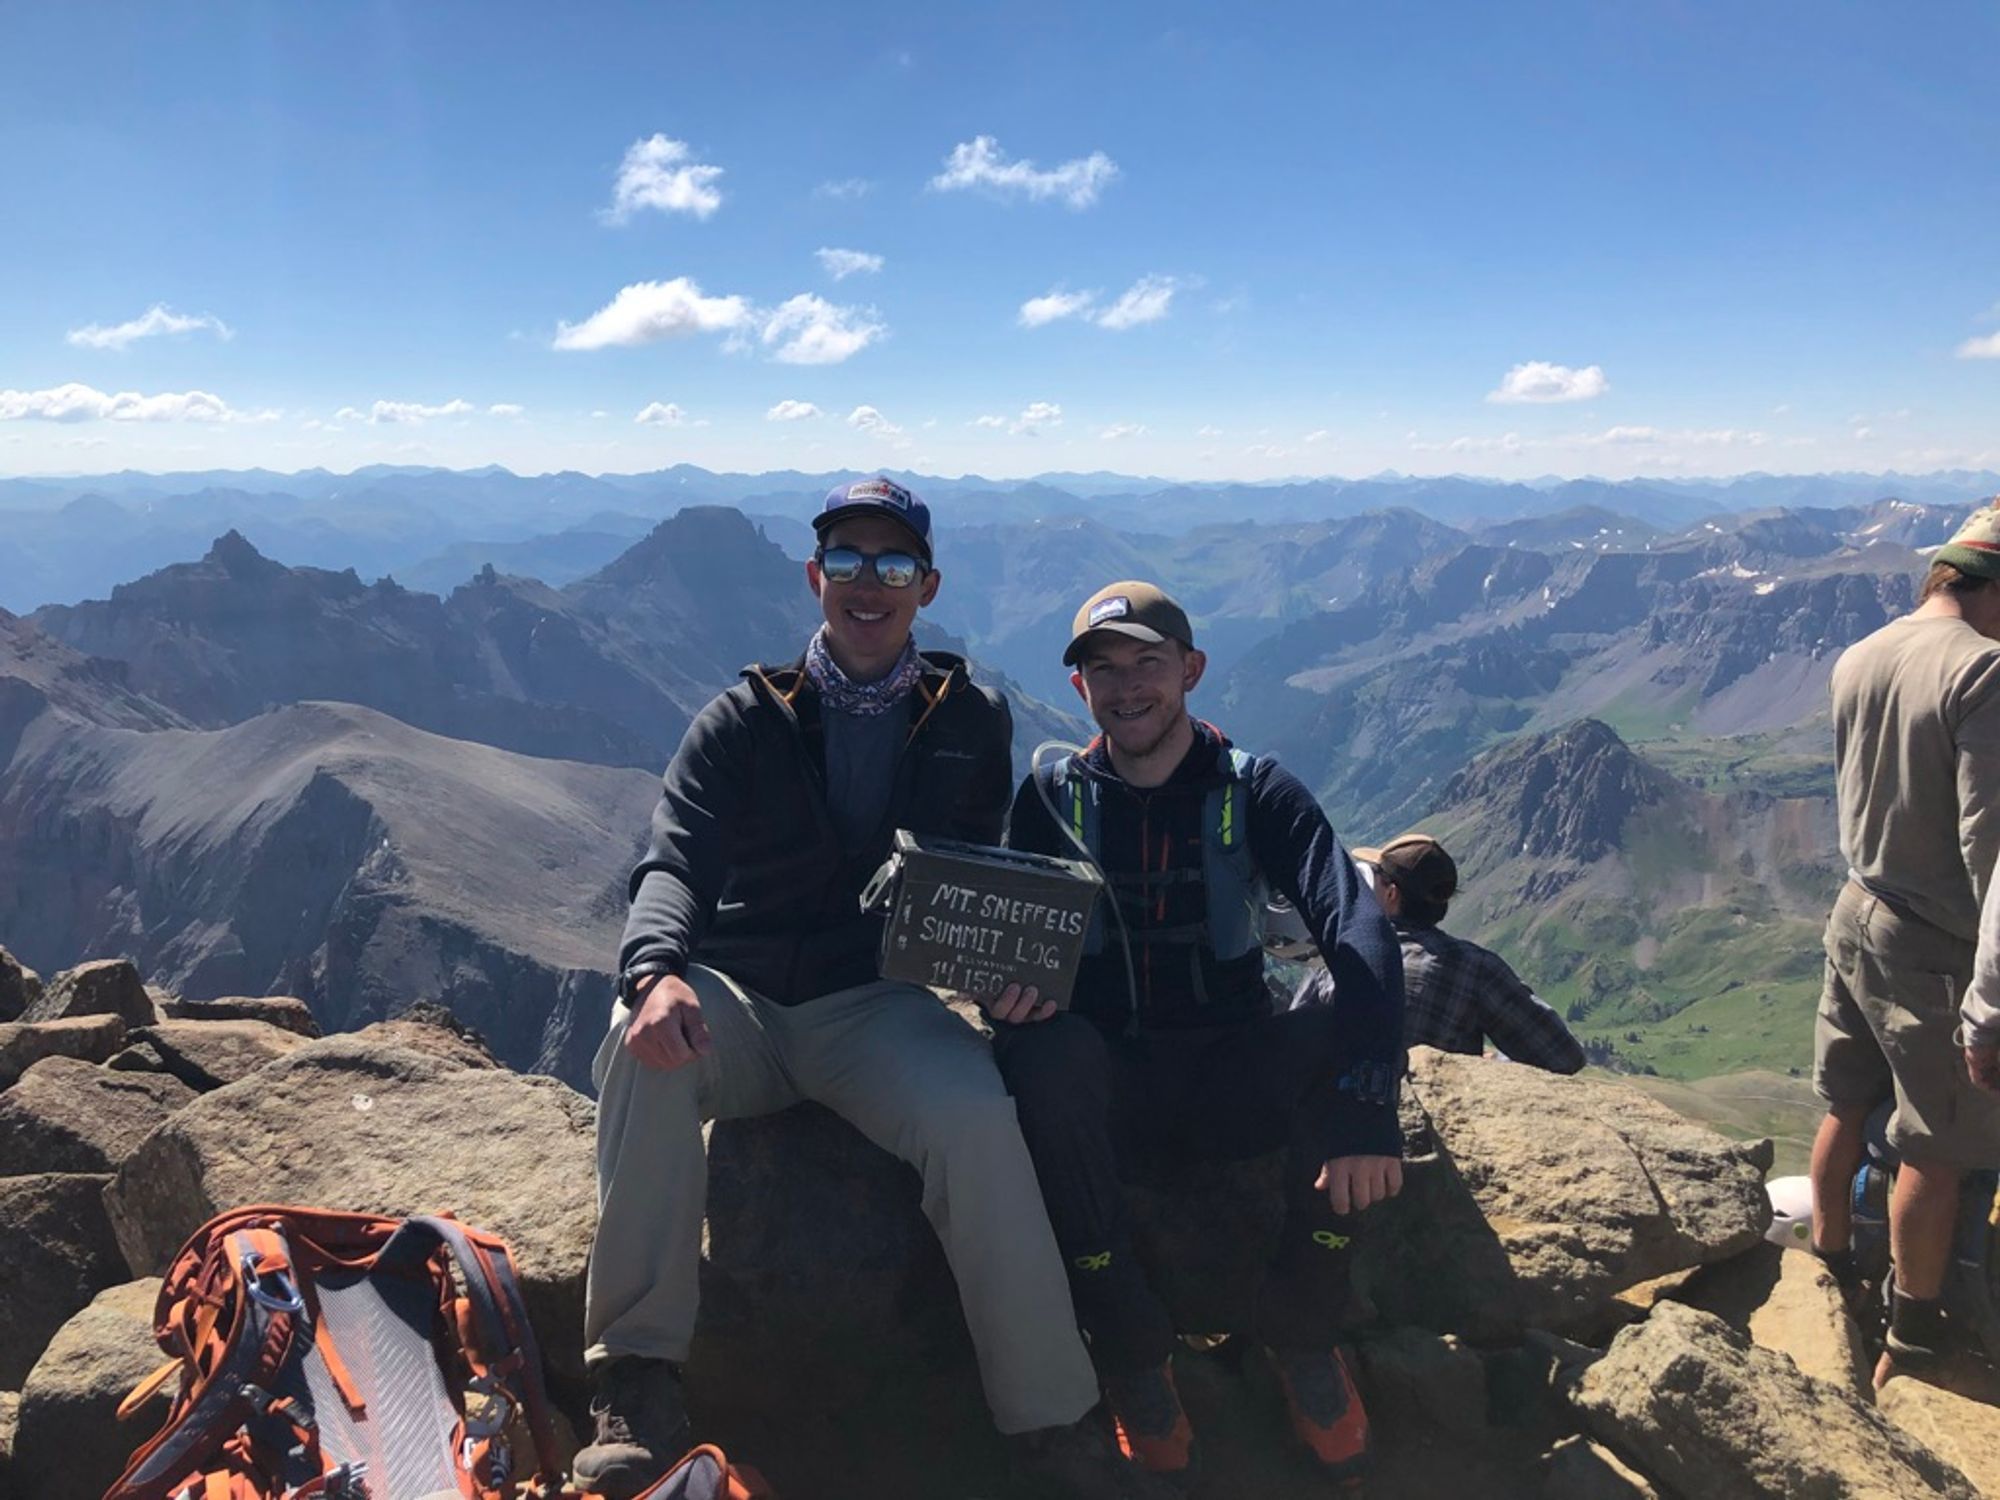 Me and Josh sitting atop the summit with the summit log (ammo can)